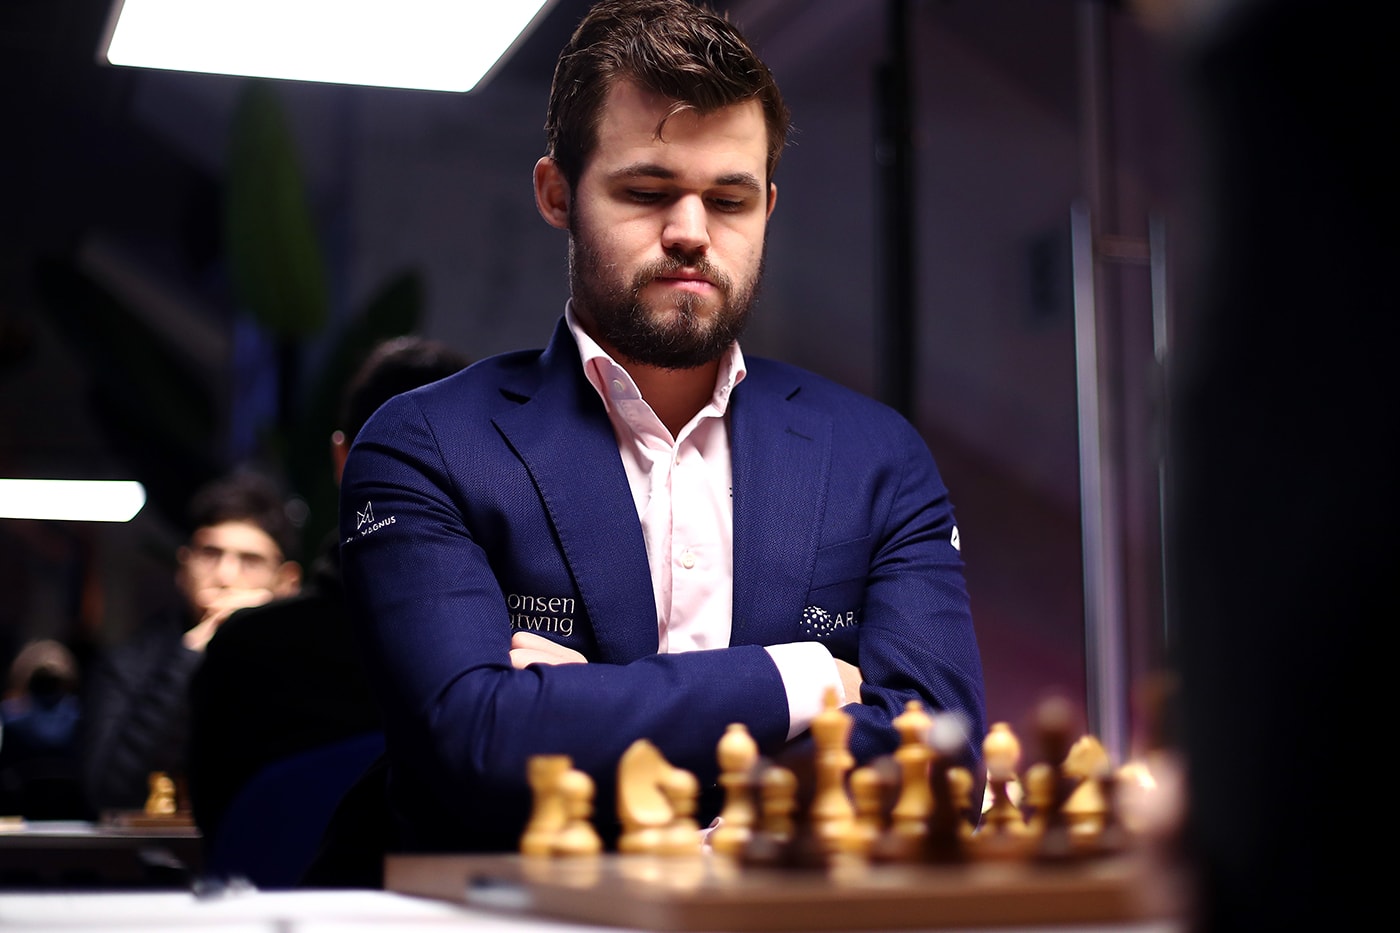 Magnus Carlsen to give up World Championship title